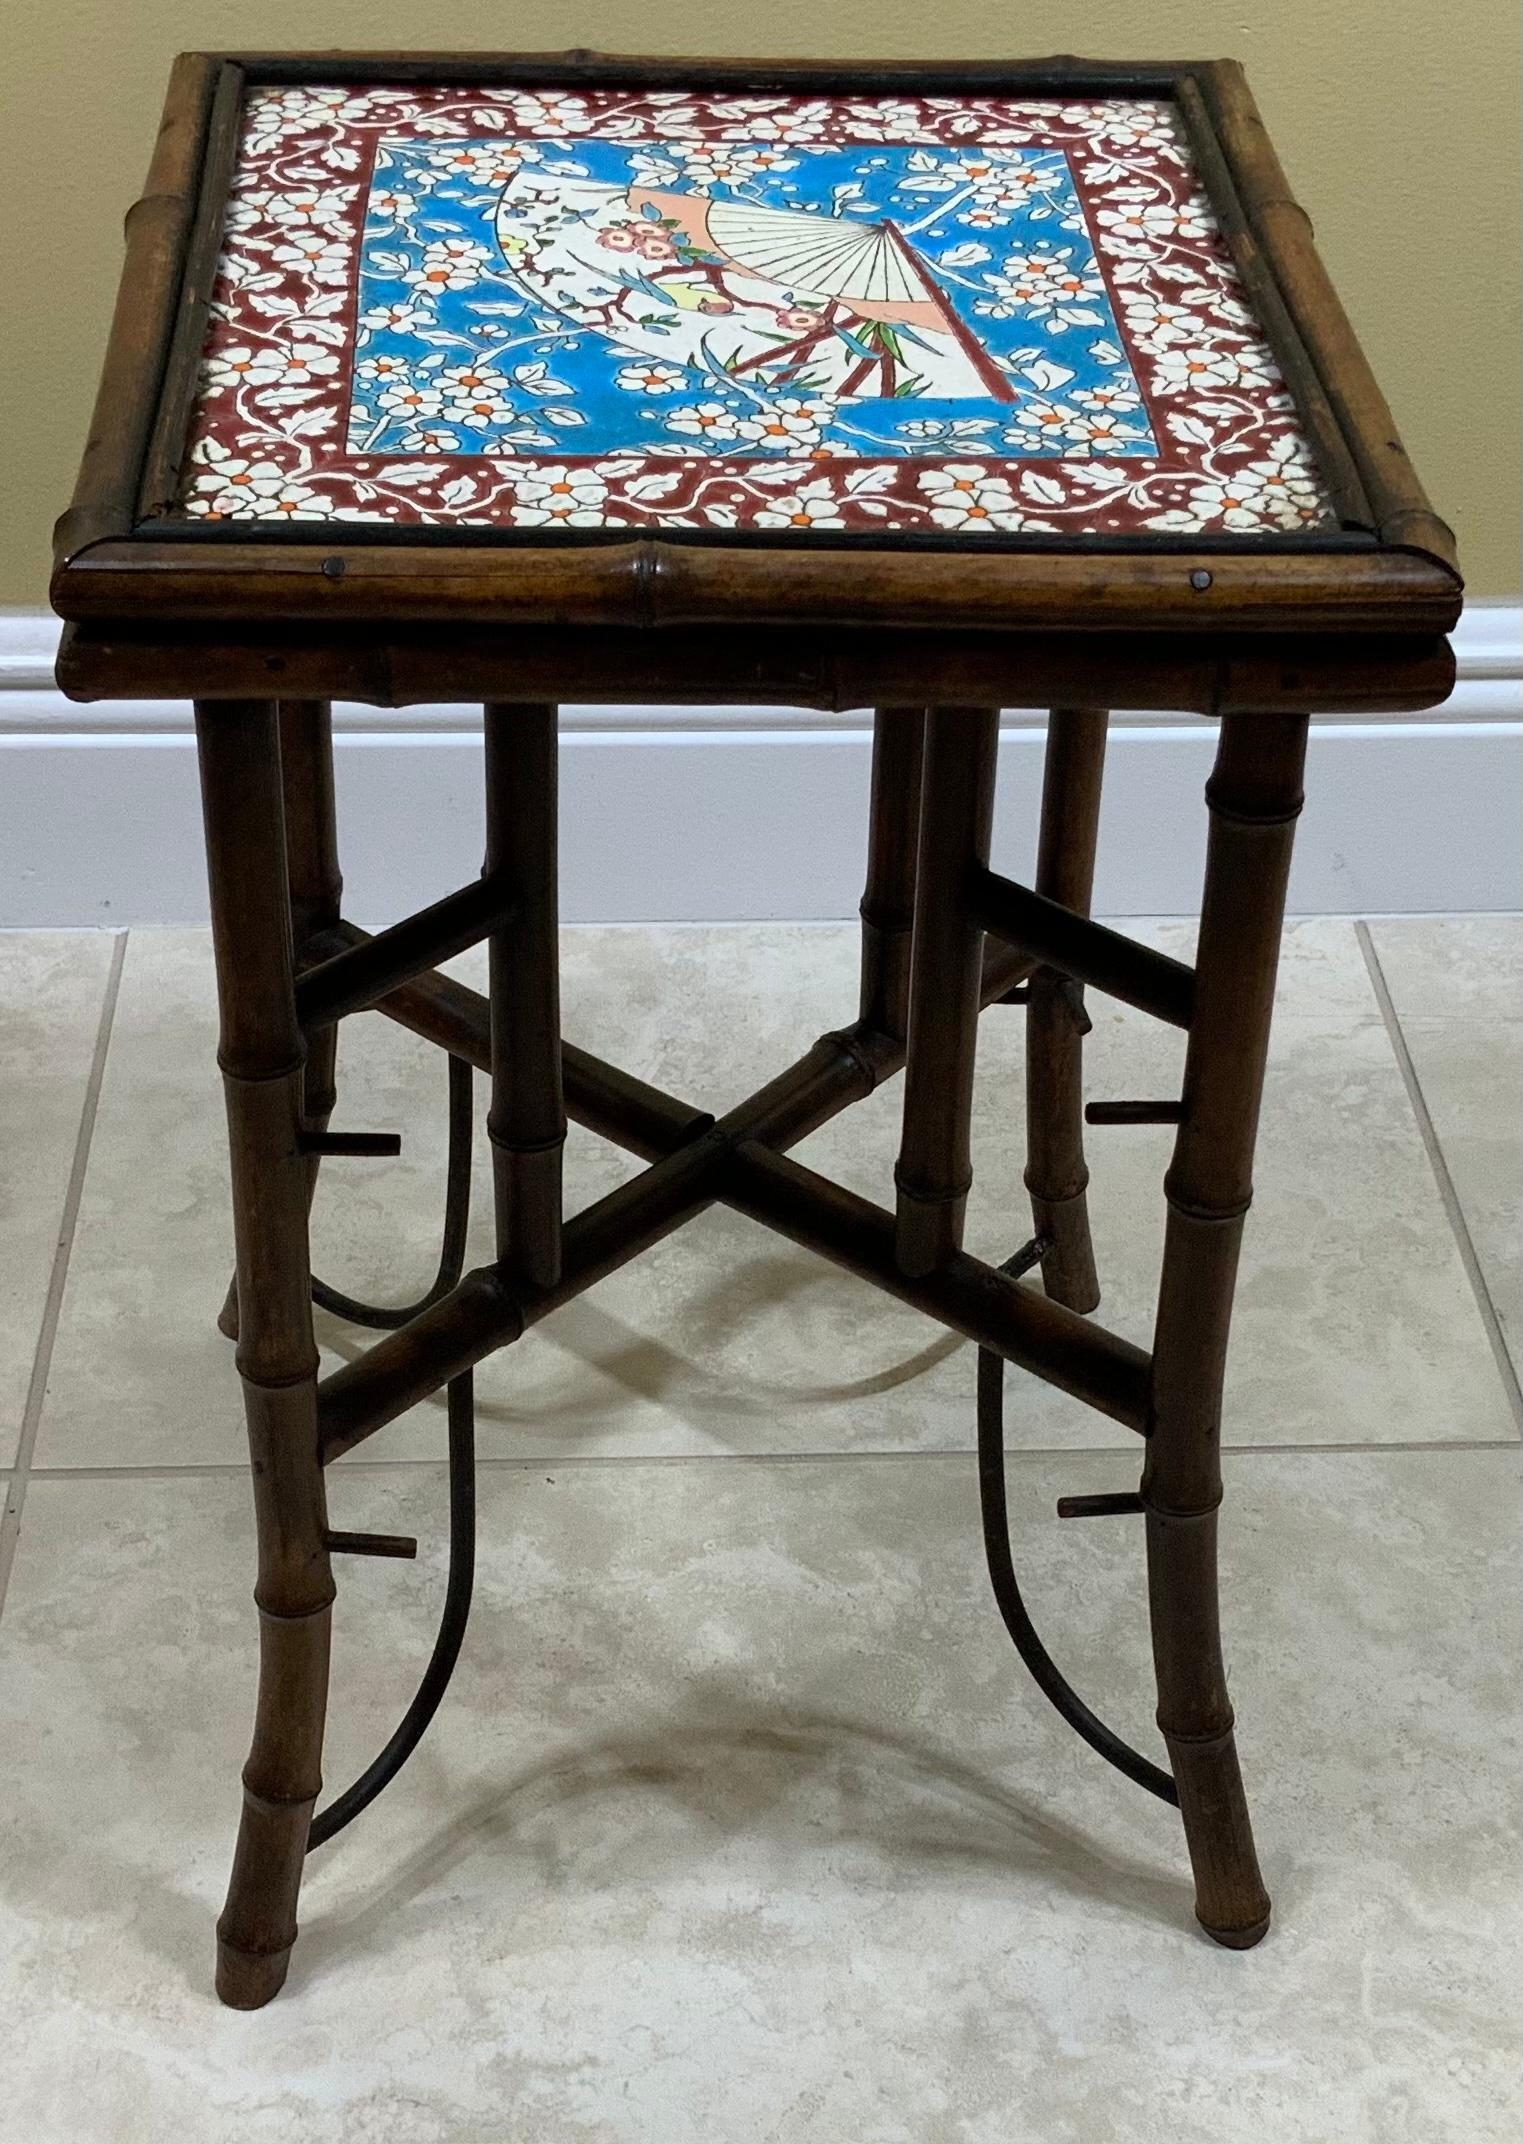 Unknown Antique Top Tile Bamboo Small Table